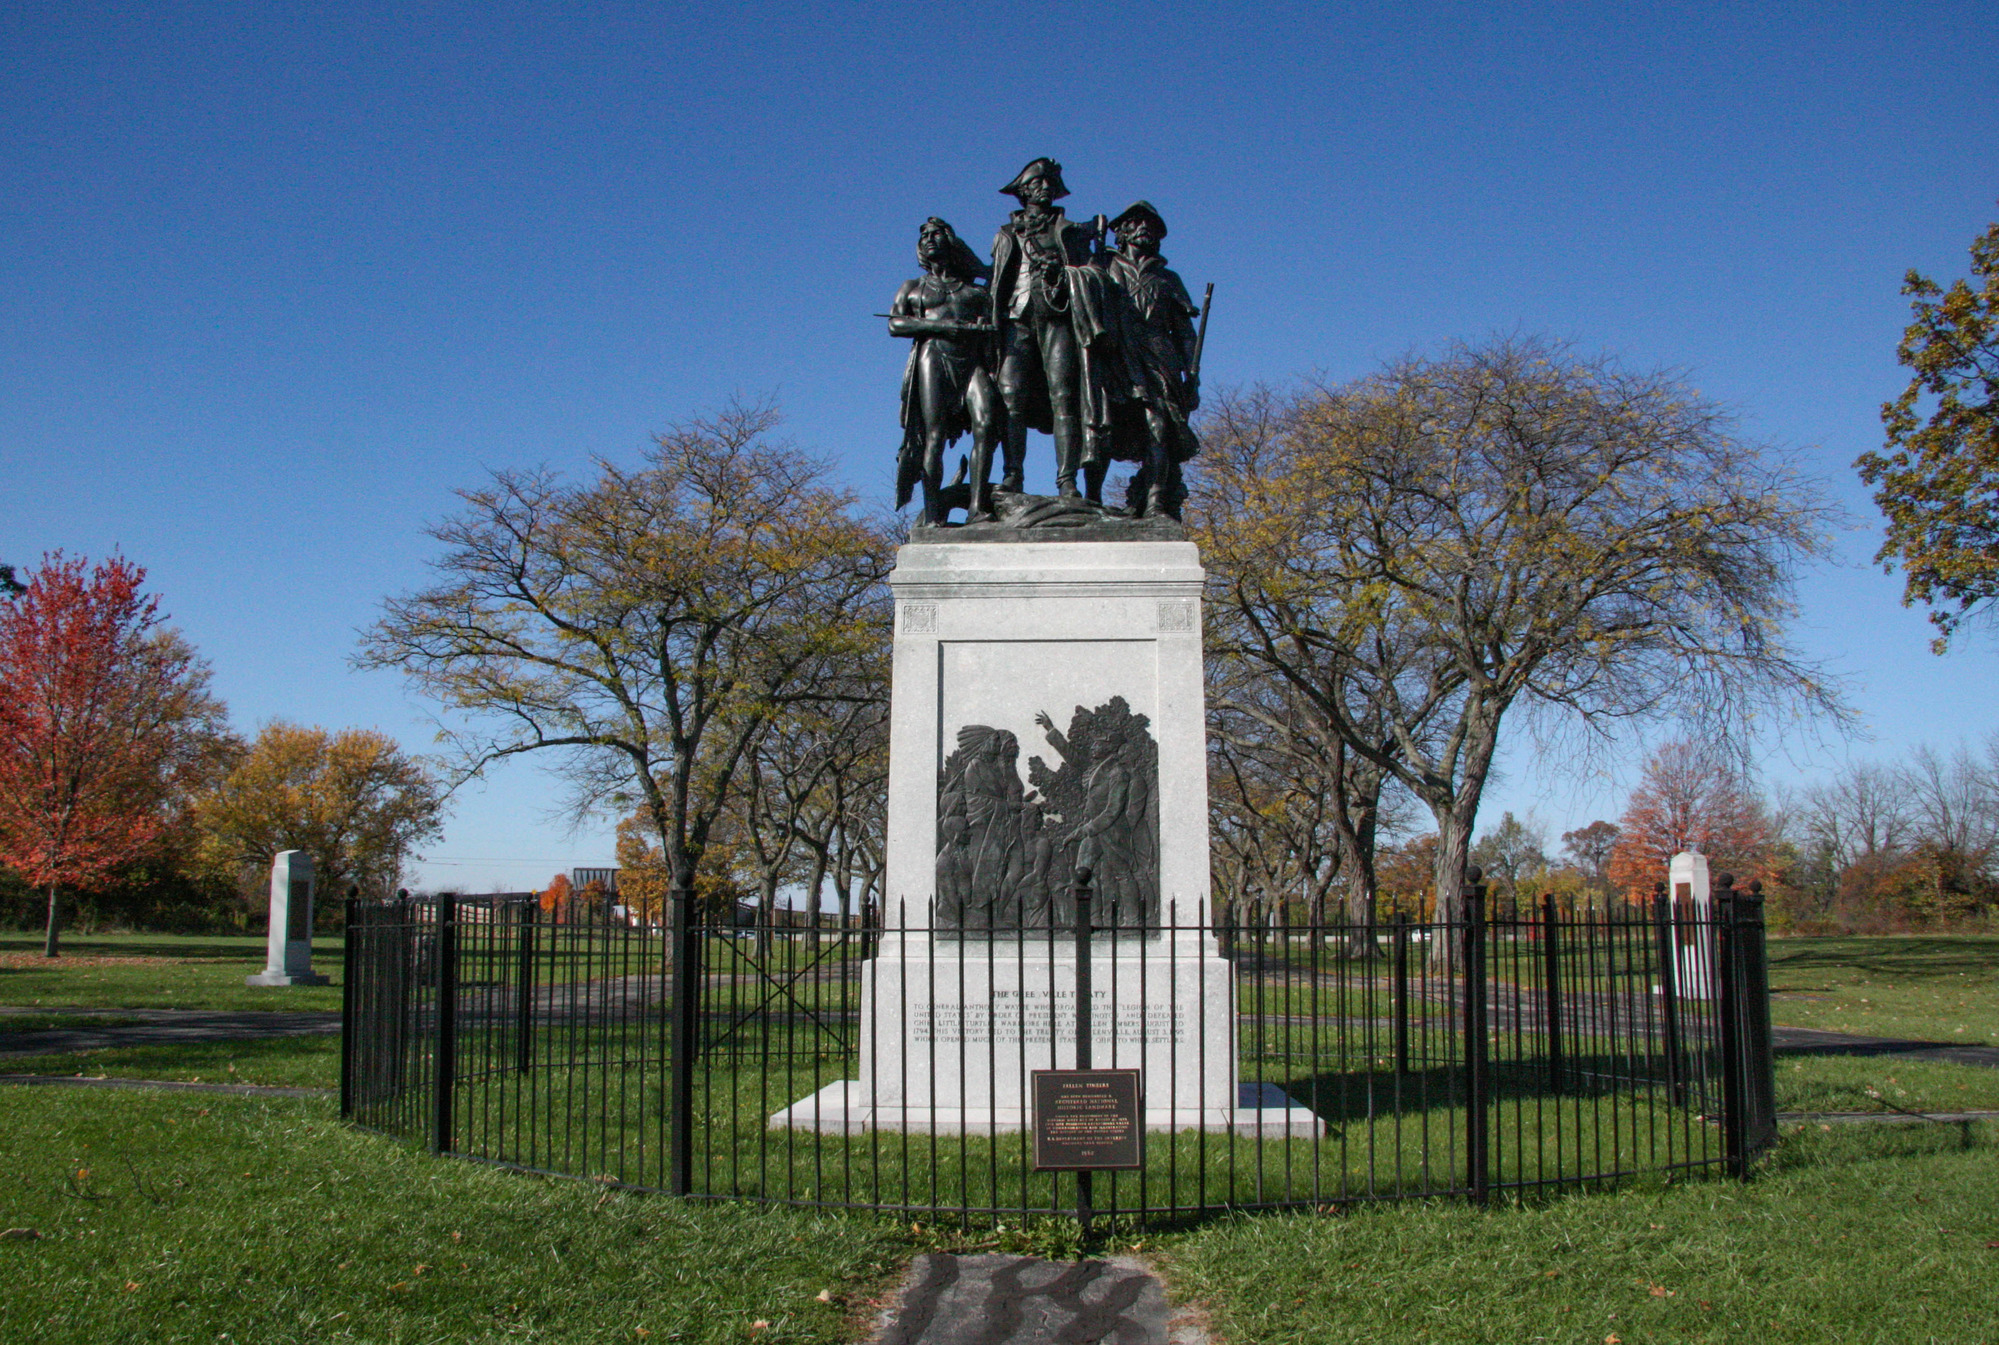 Statue of a Native American, soldier, and frontiersman encircled by a fence in a park